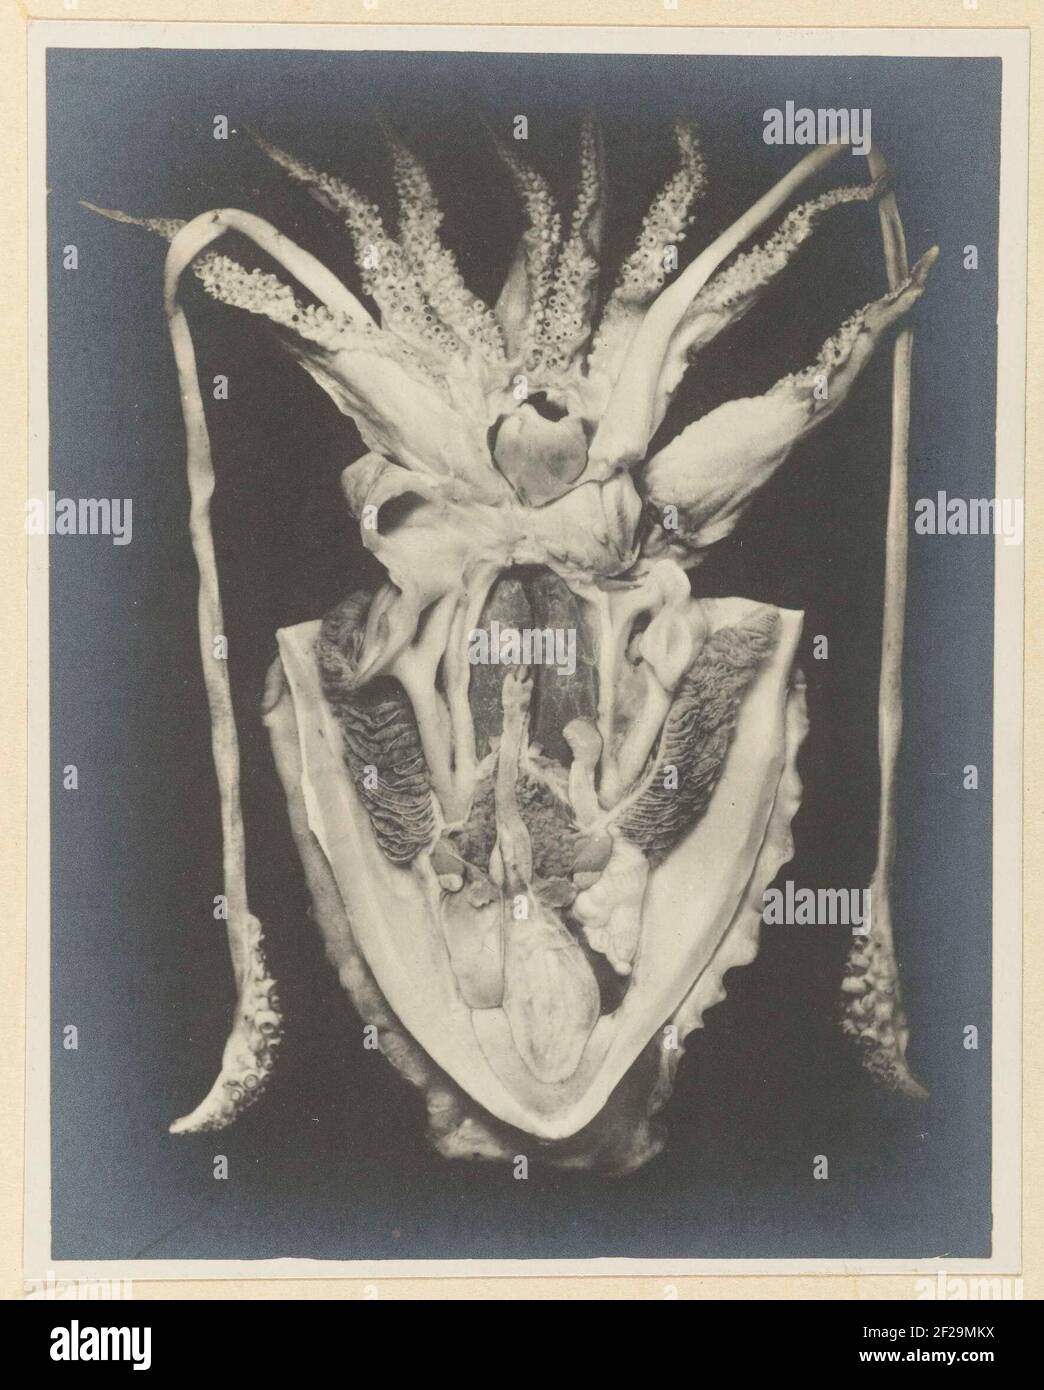 Anatomy van Een Inktvis; Anatomy of the seiche.foto in album 'The photograph of immersed objects', 1901. Stock Photo